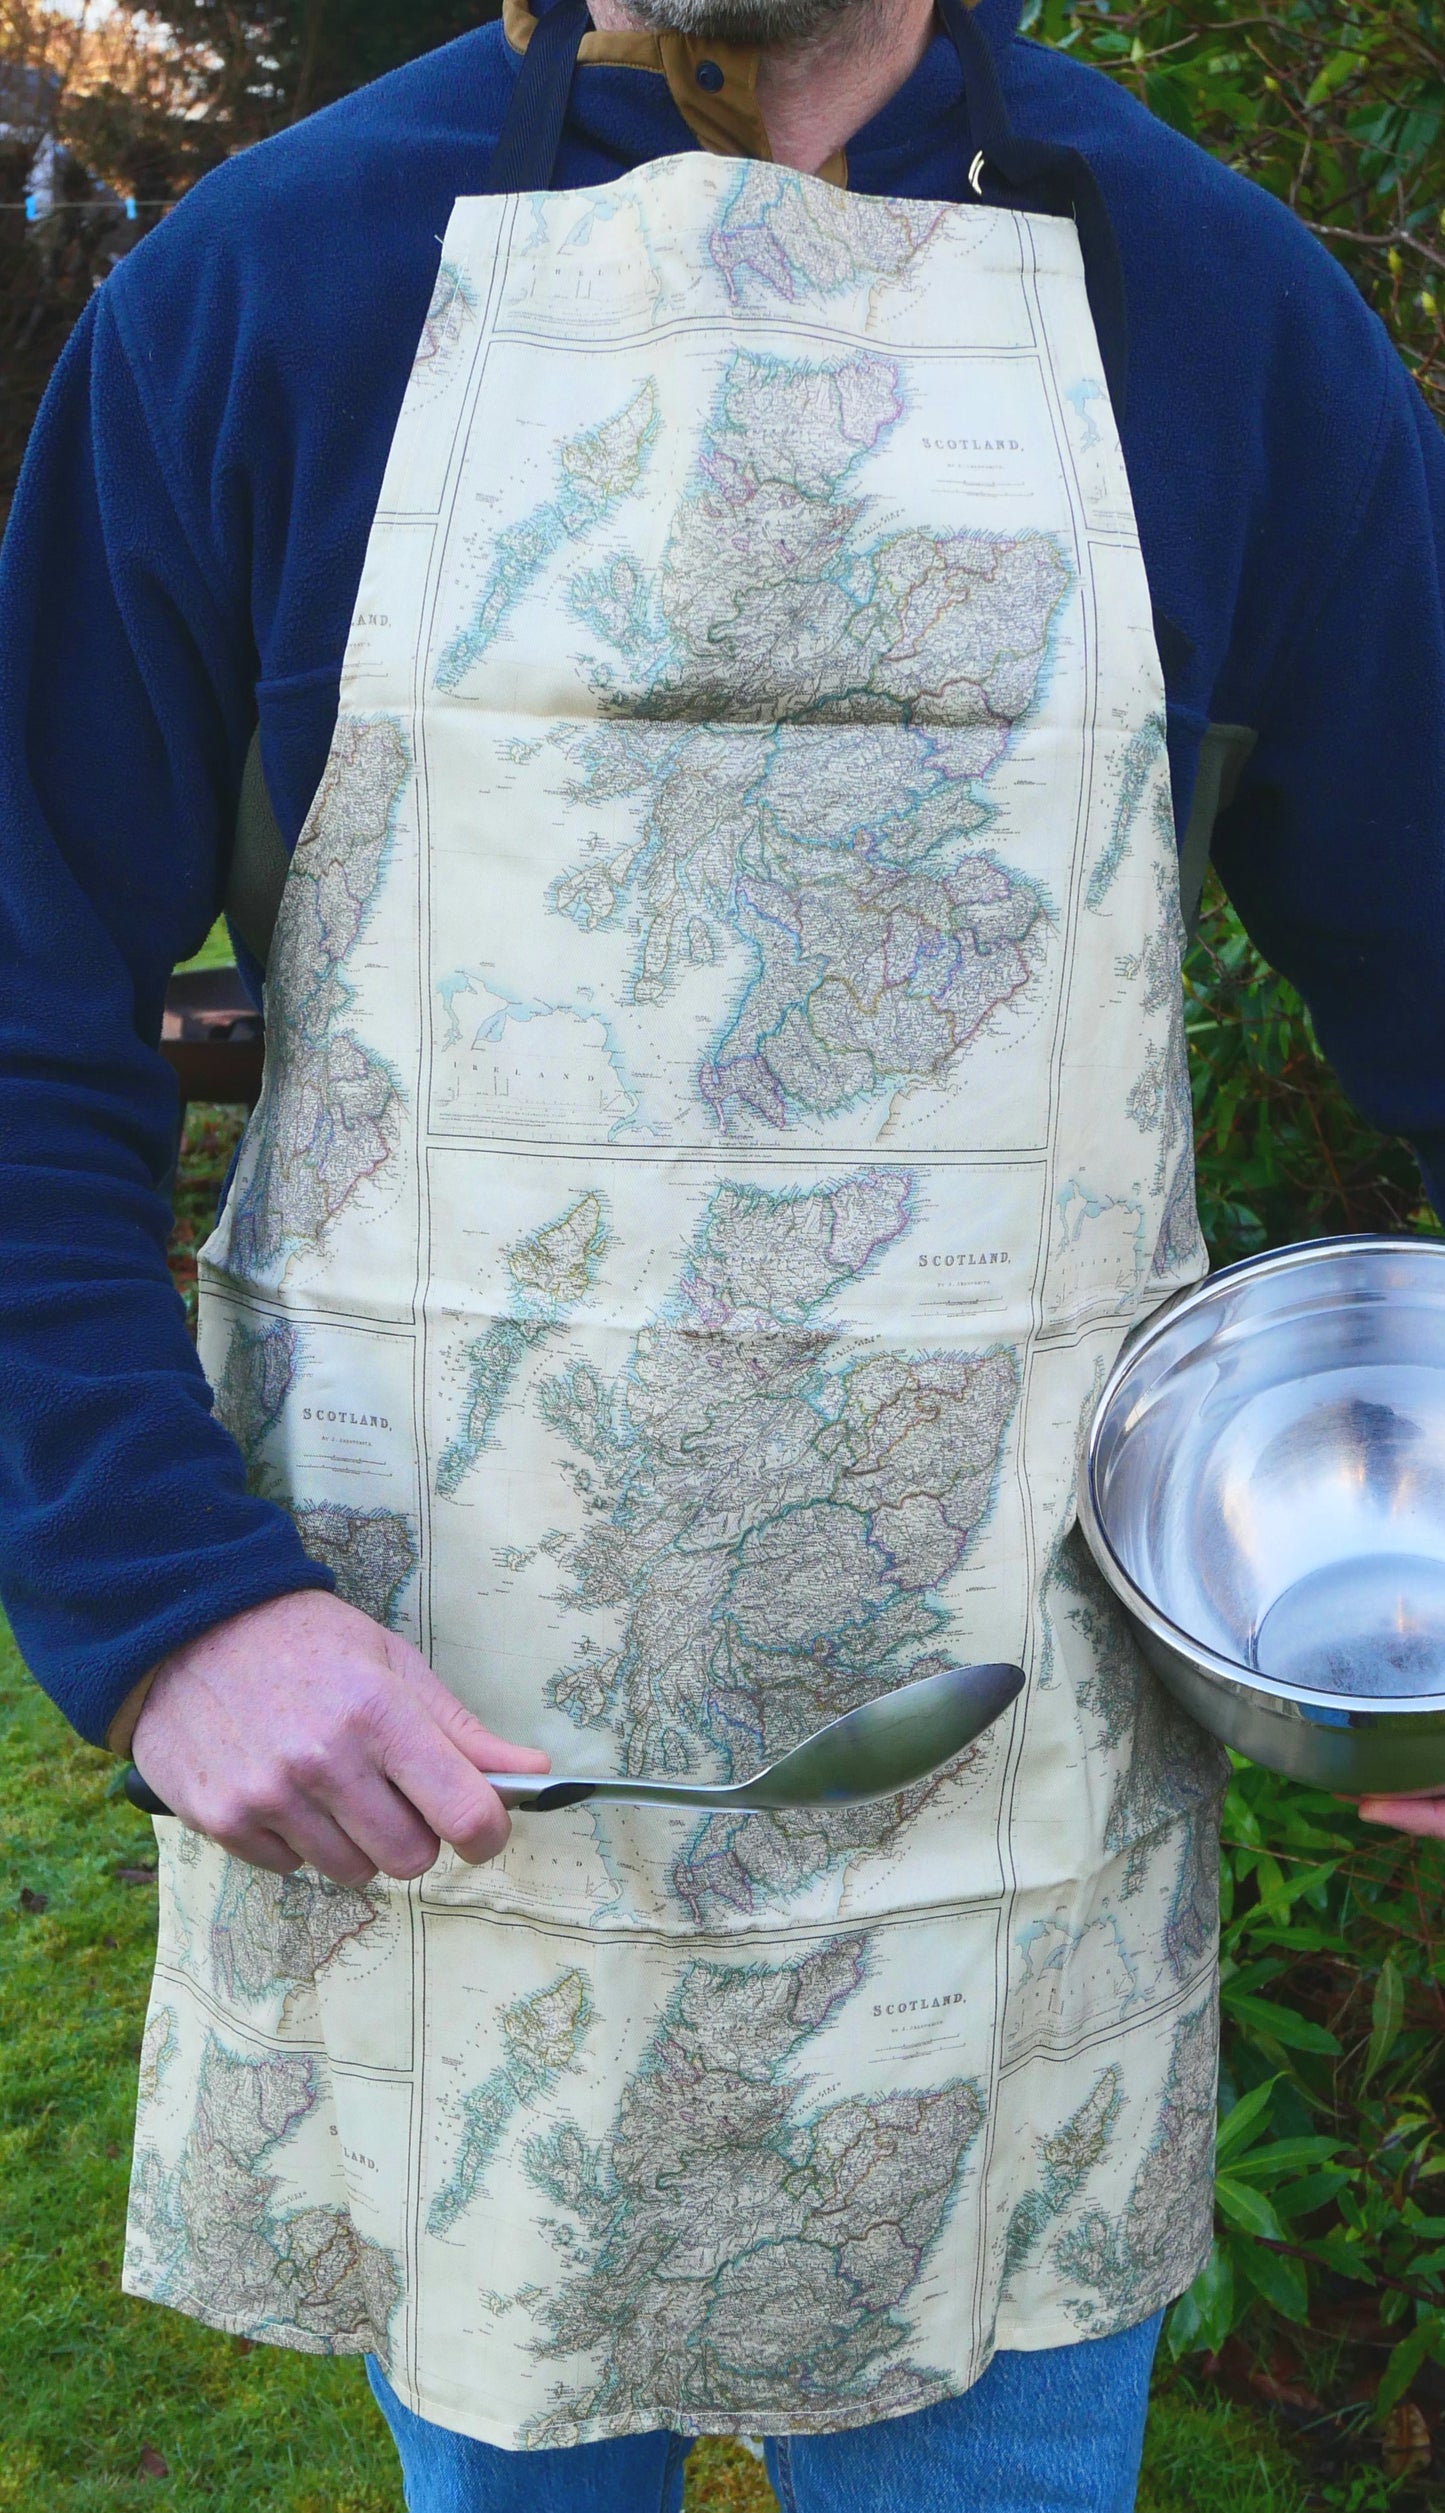 Apron with entire Scottish Map